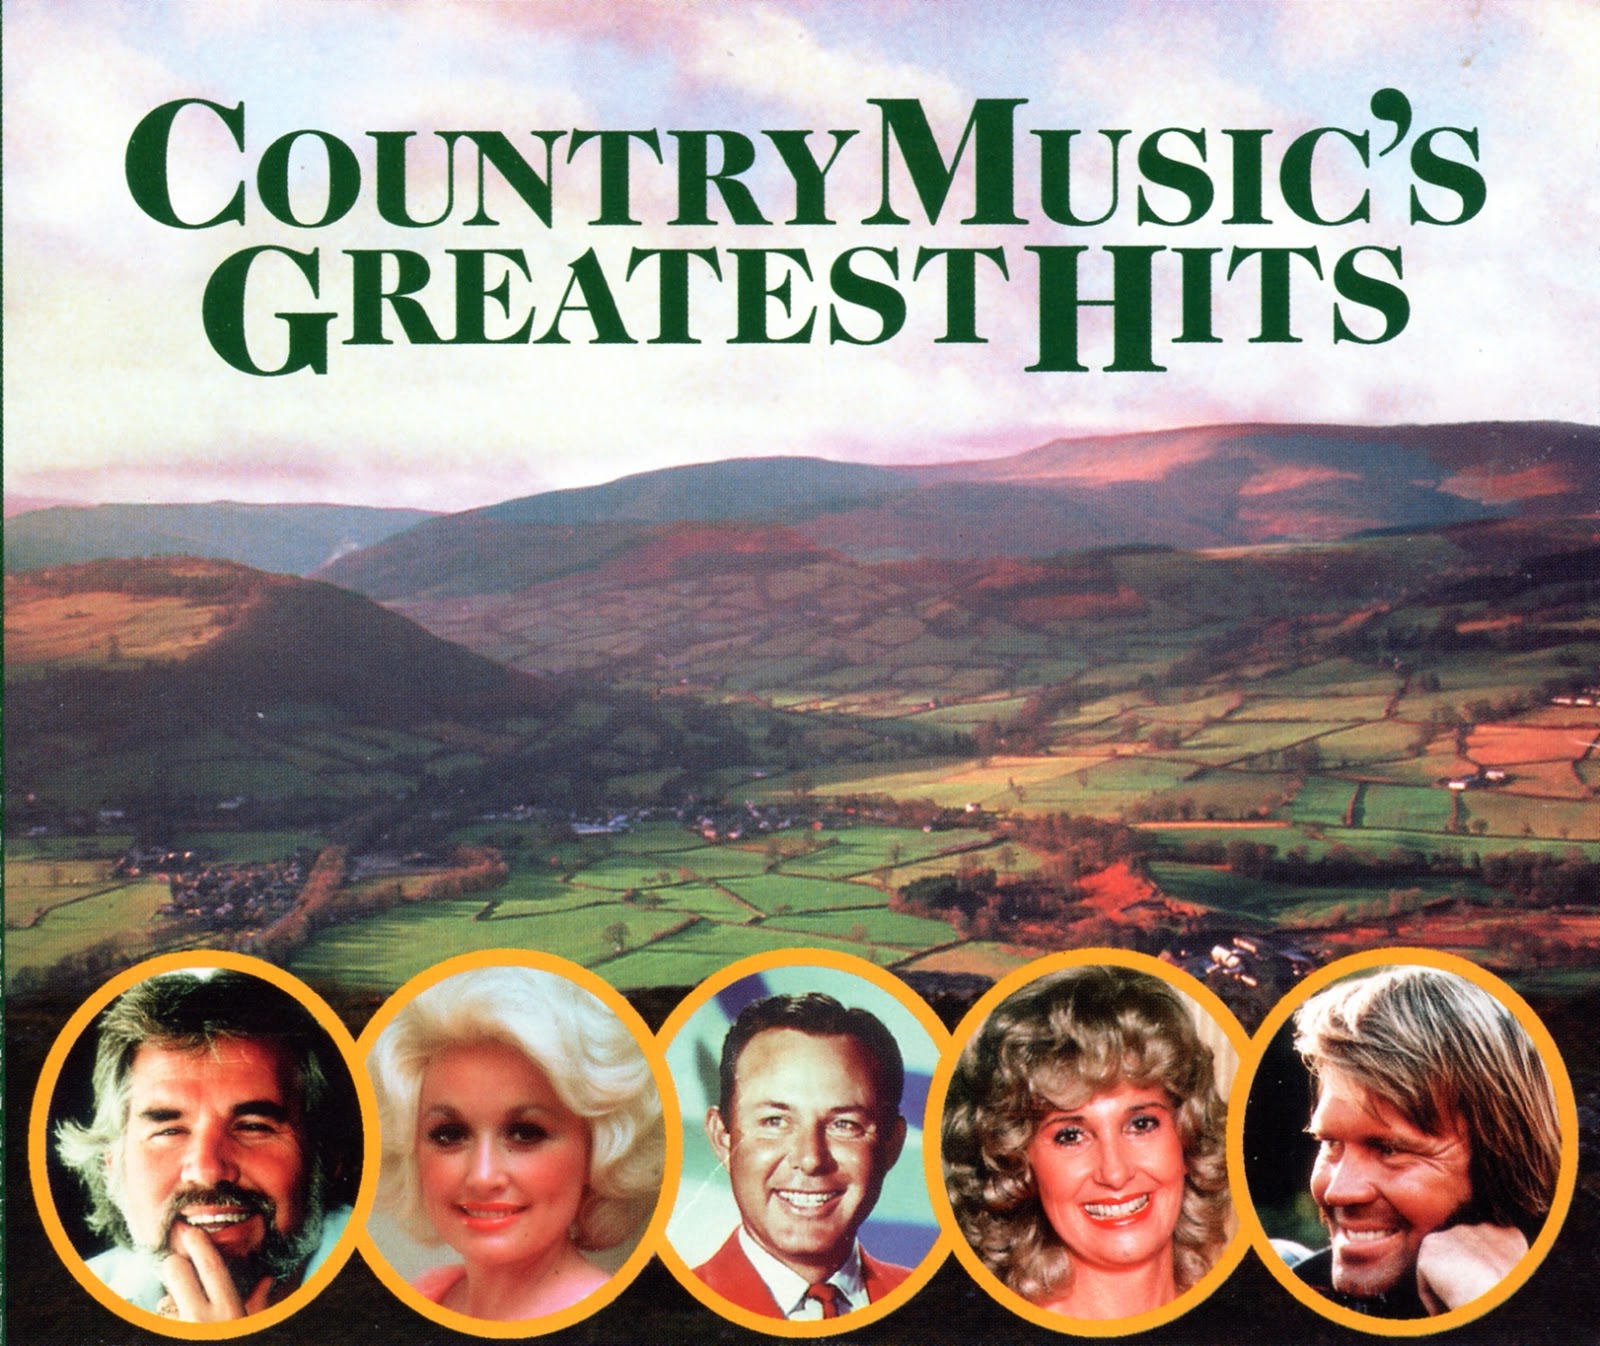 Reader S Digest Albums Country Music S Greatest Hits